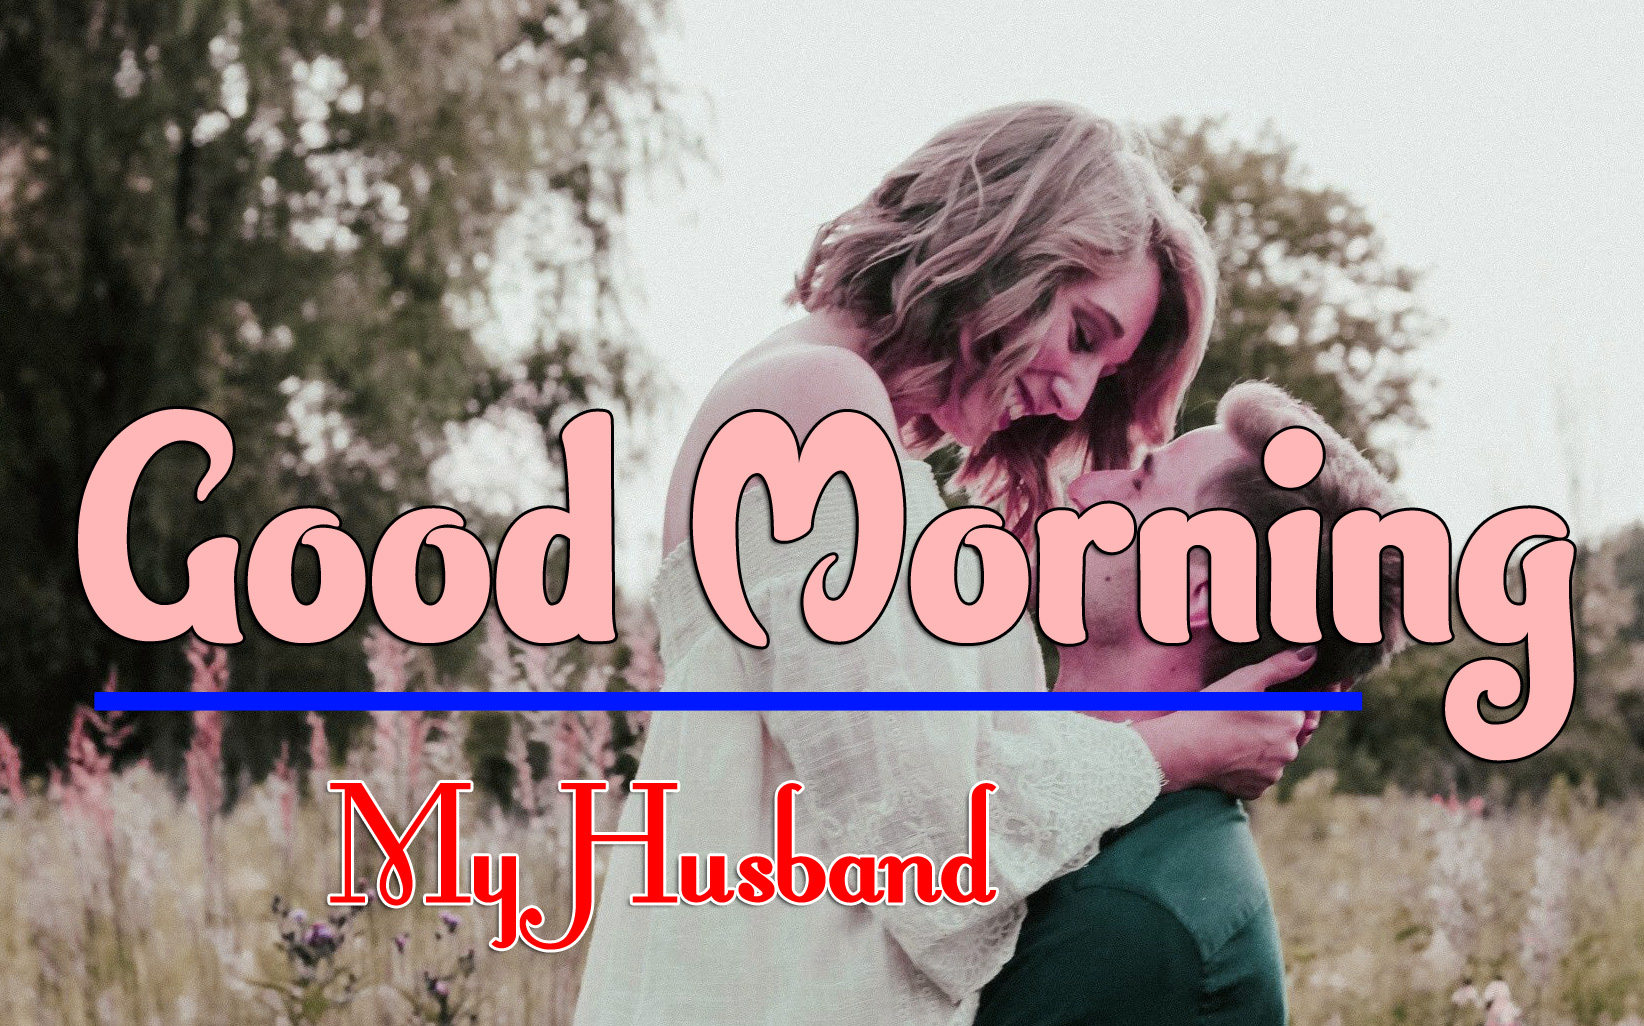 80+ Romantic Good Morning Wishes And Images For Husband - Good ...